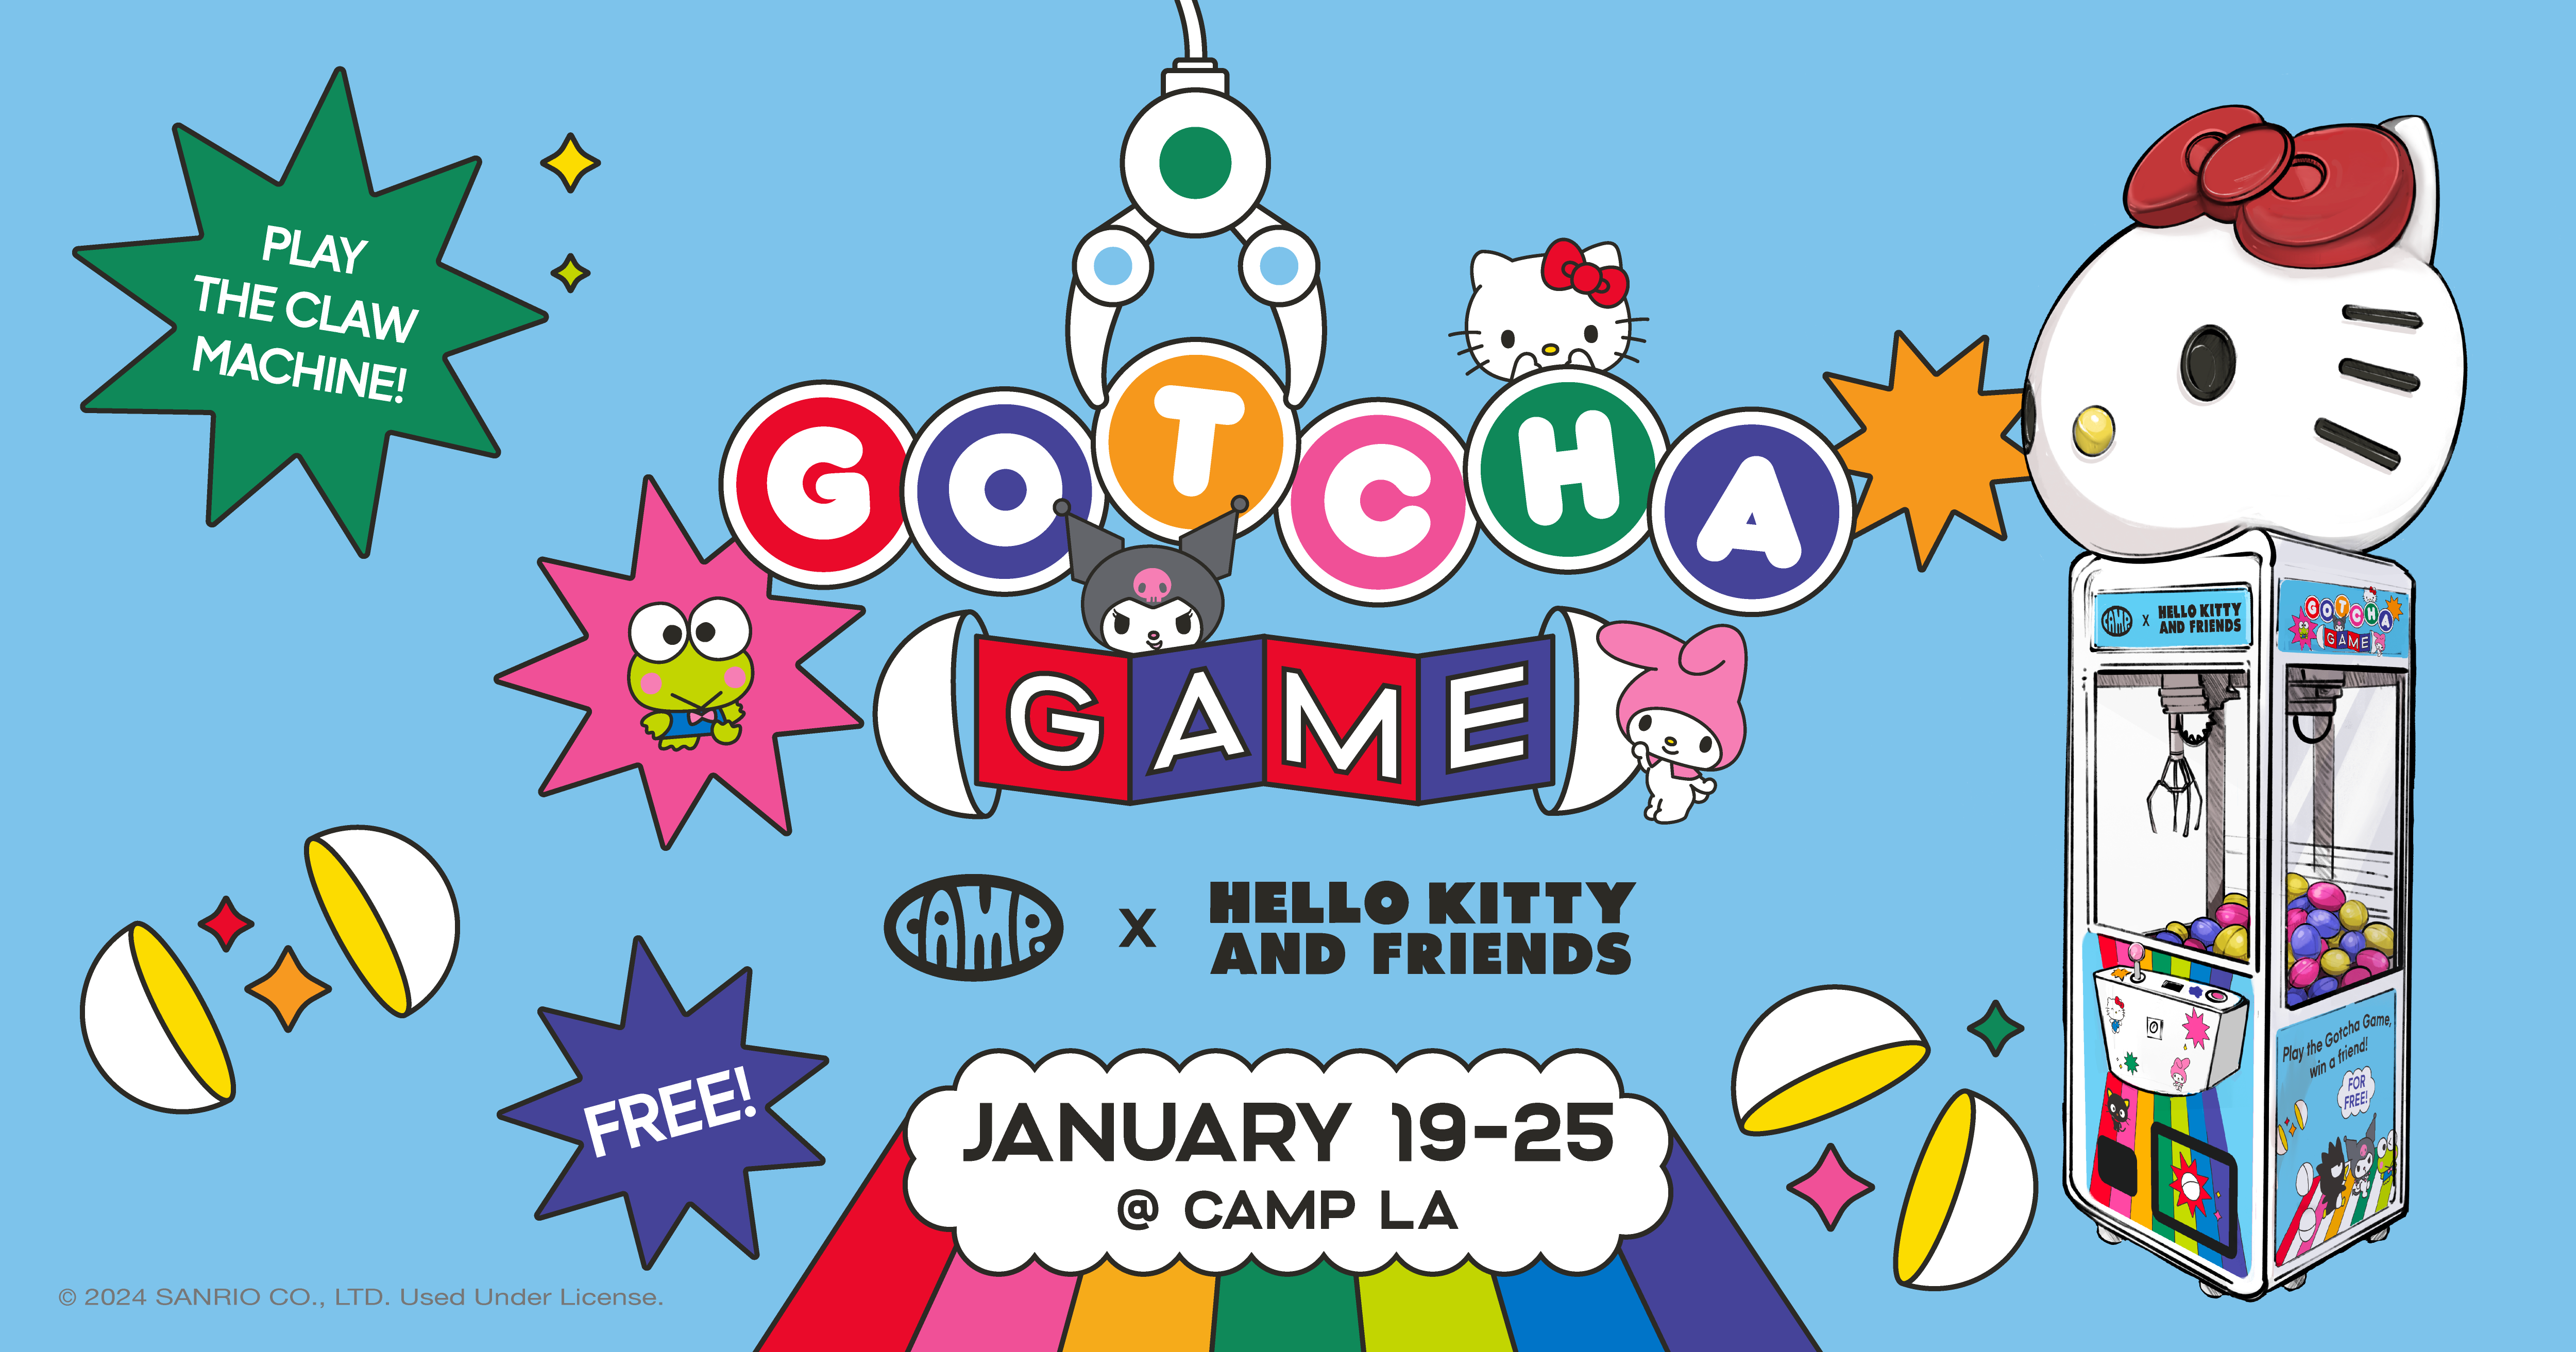 CAMP x Hello Kitty and Friends Gotcha Game